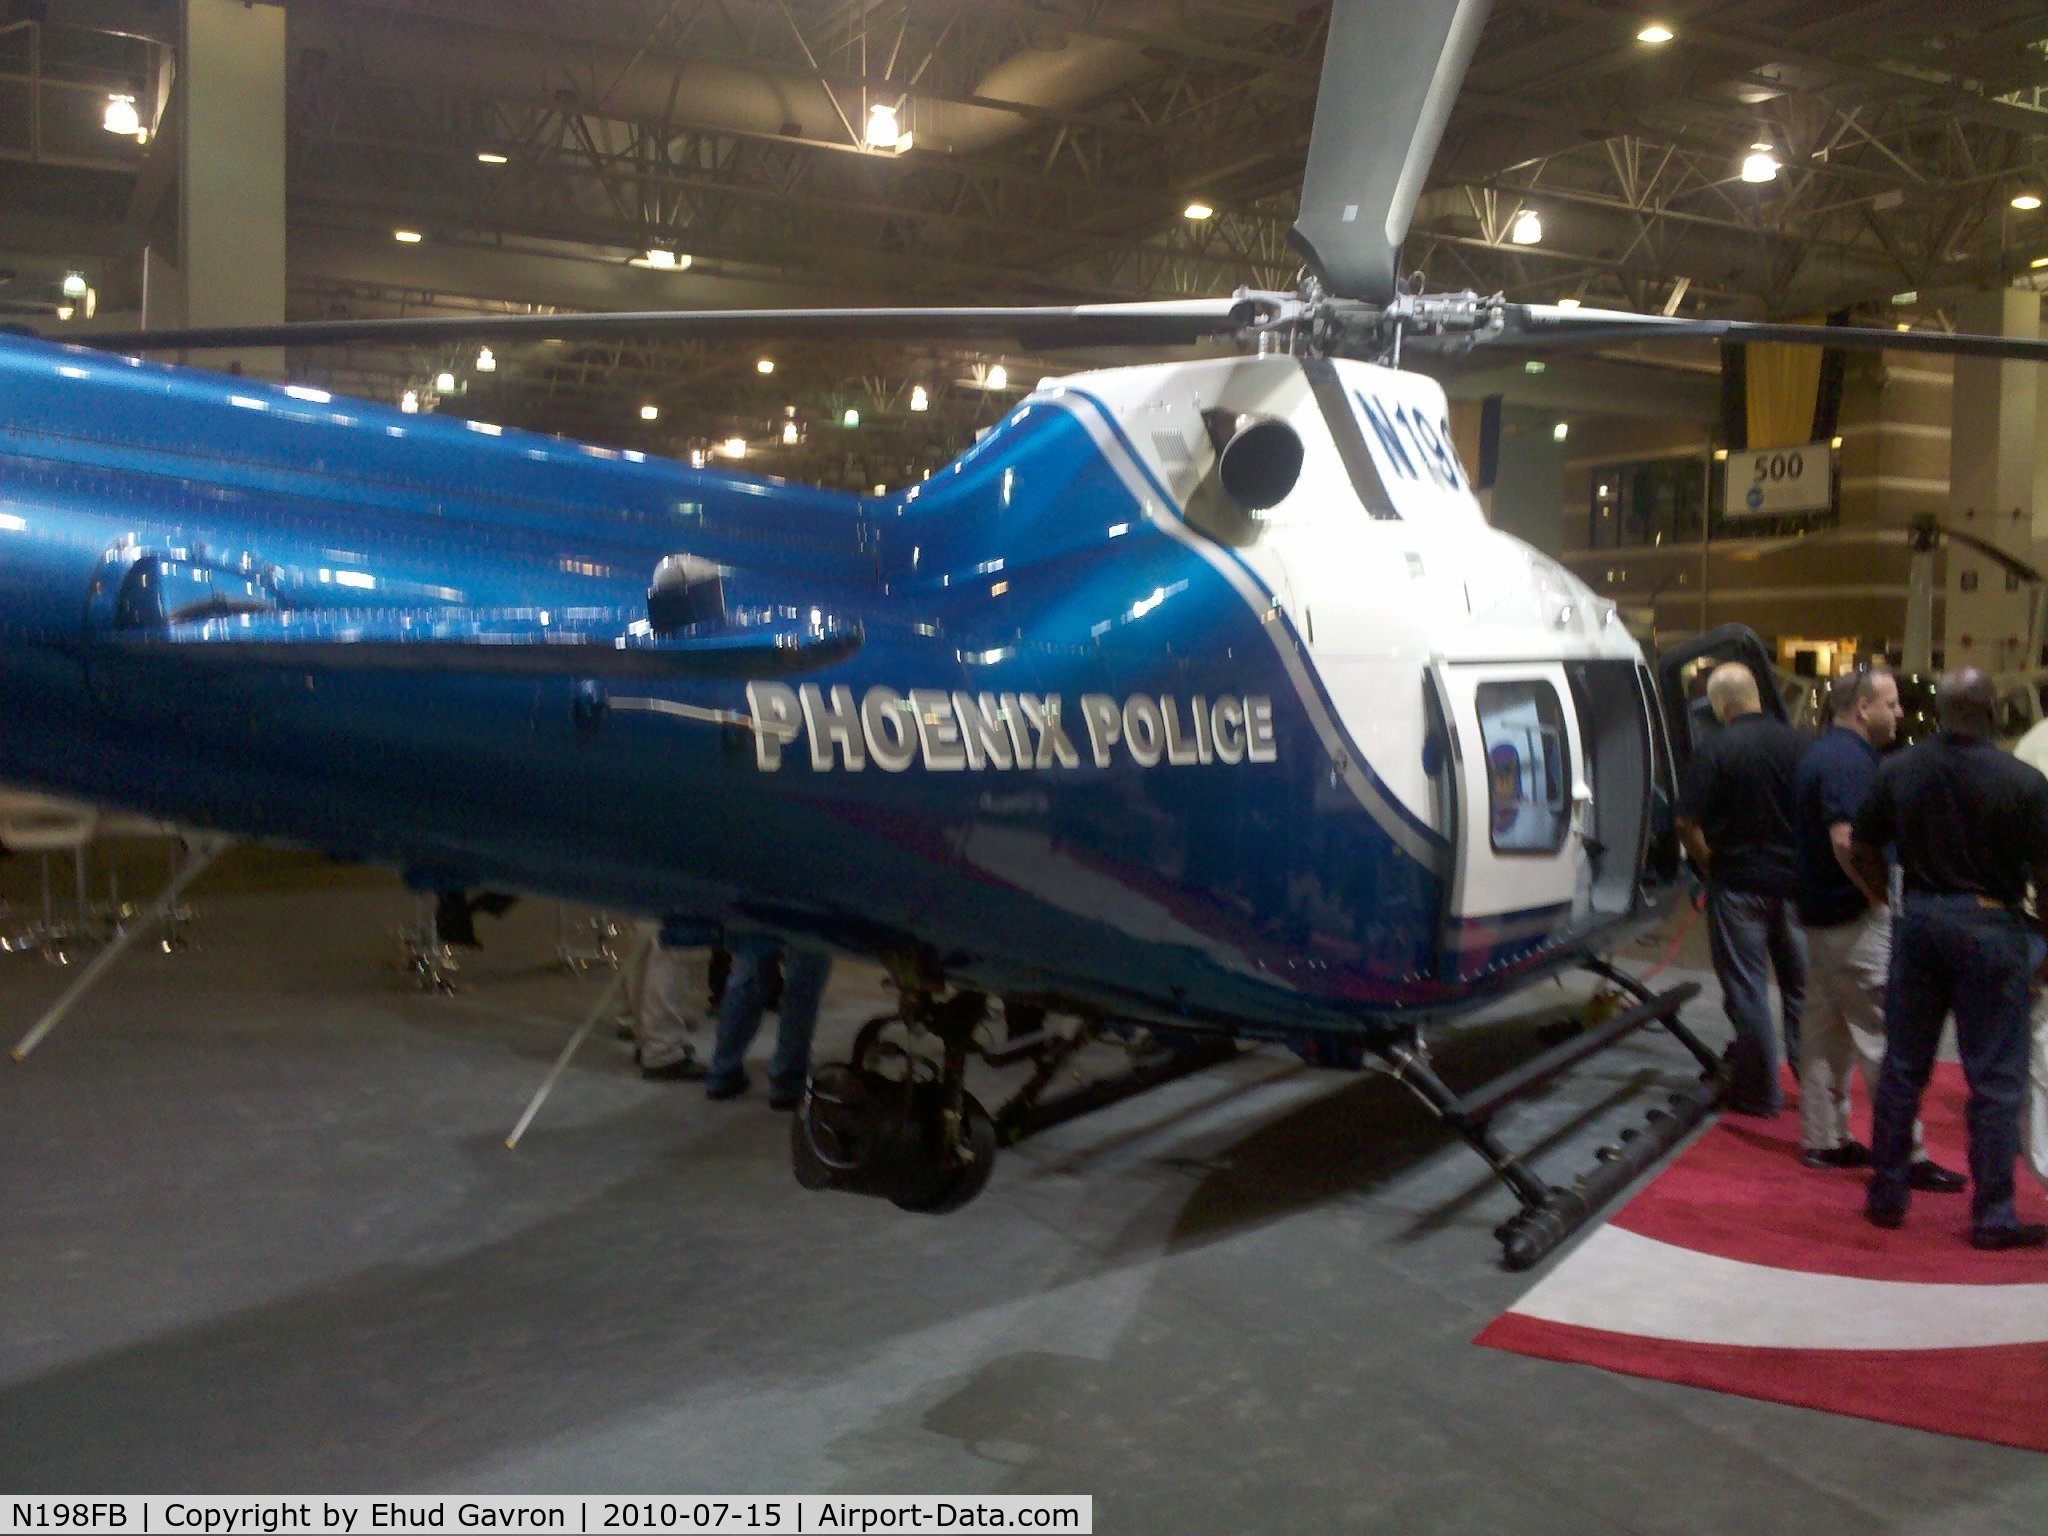 N198FB, 2006 Agusta A-119 C/N 14509, Phoenix Police helicopter on display at the Airborne Law Enforcement Assocation convention, Tucson Convention Center, Tucson AZ.